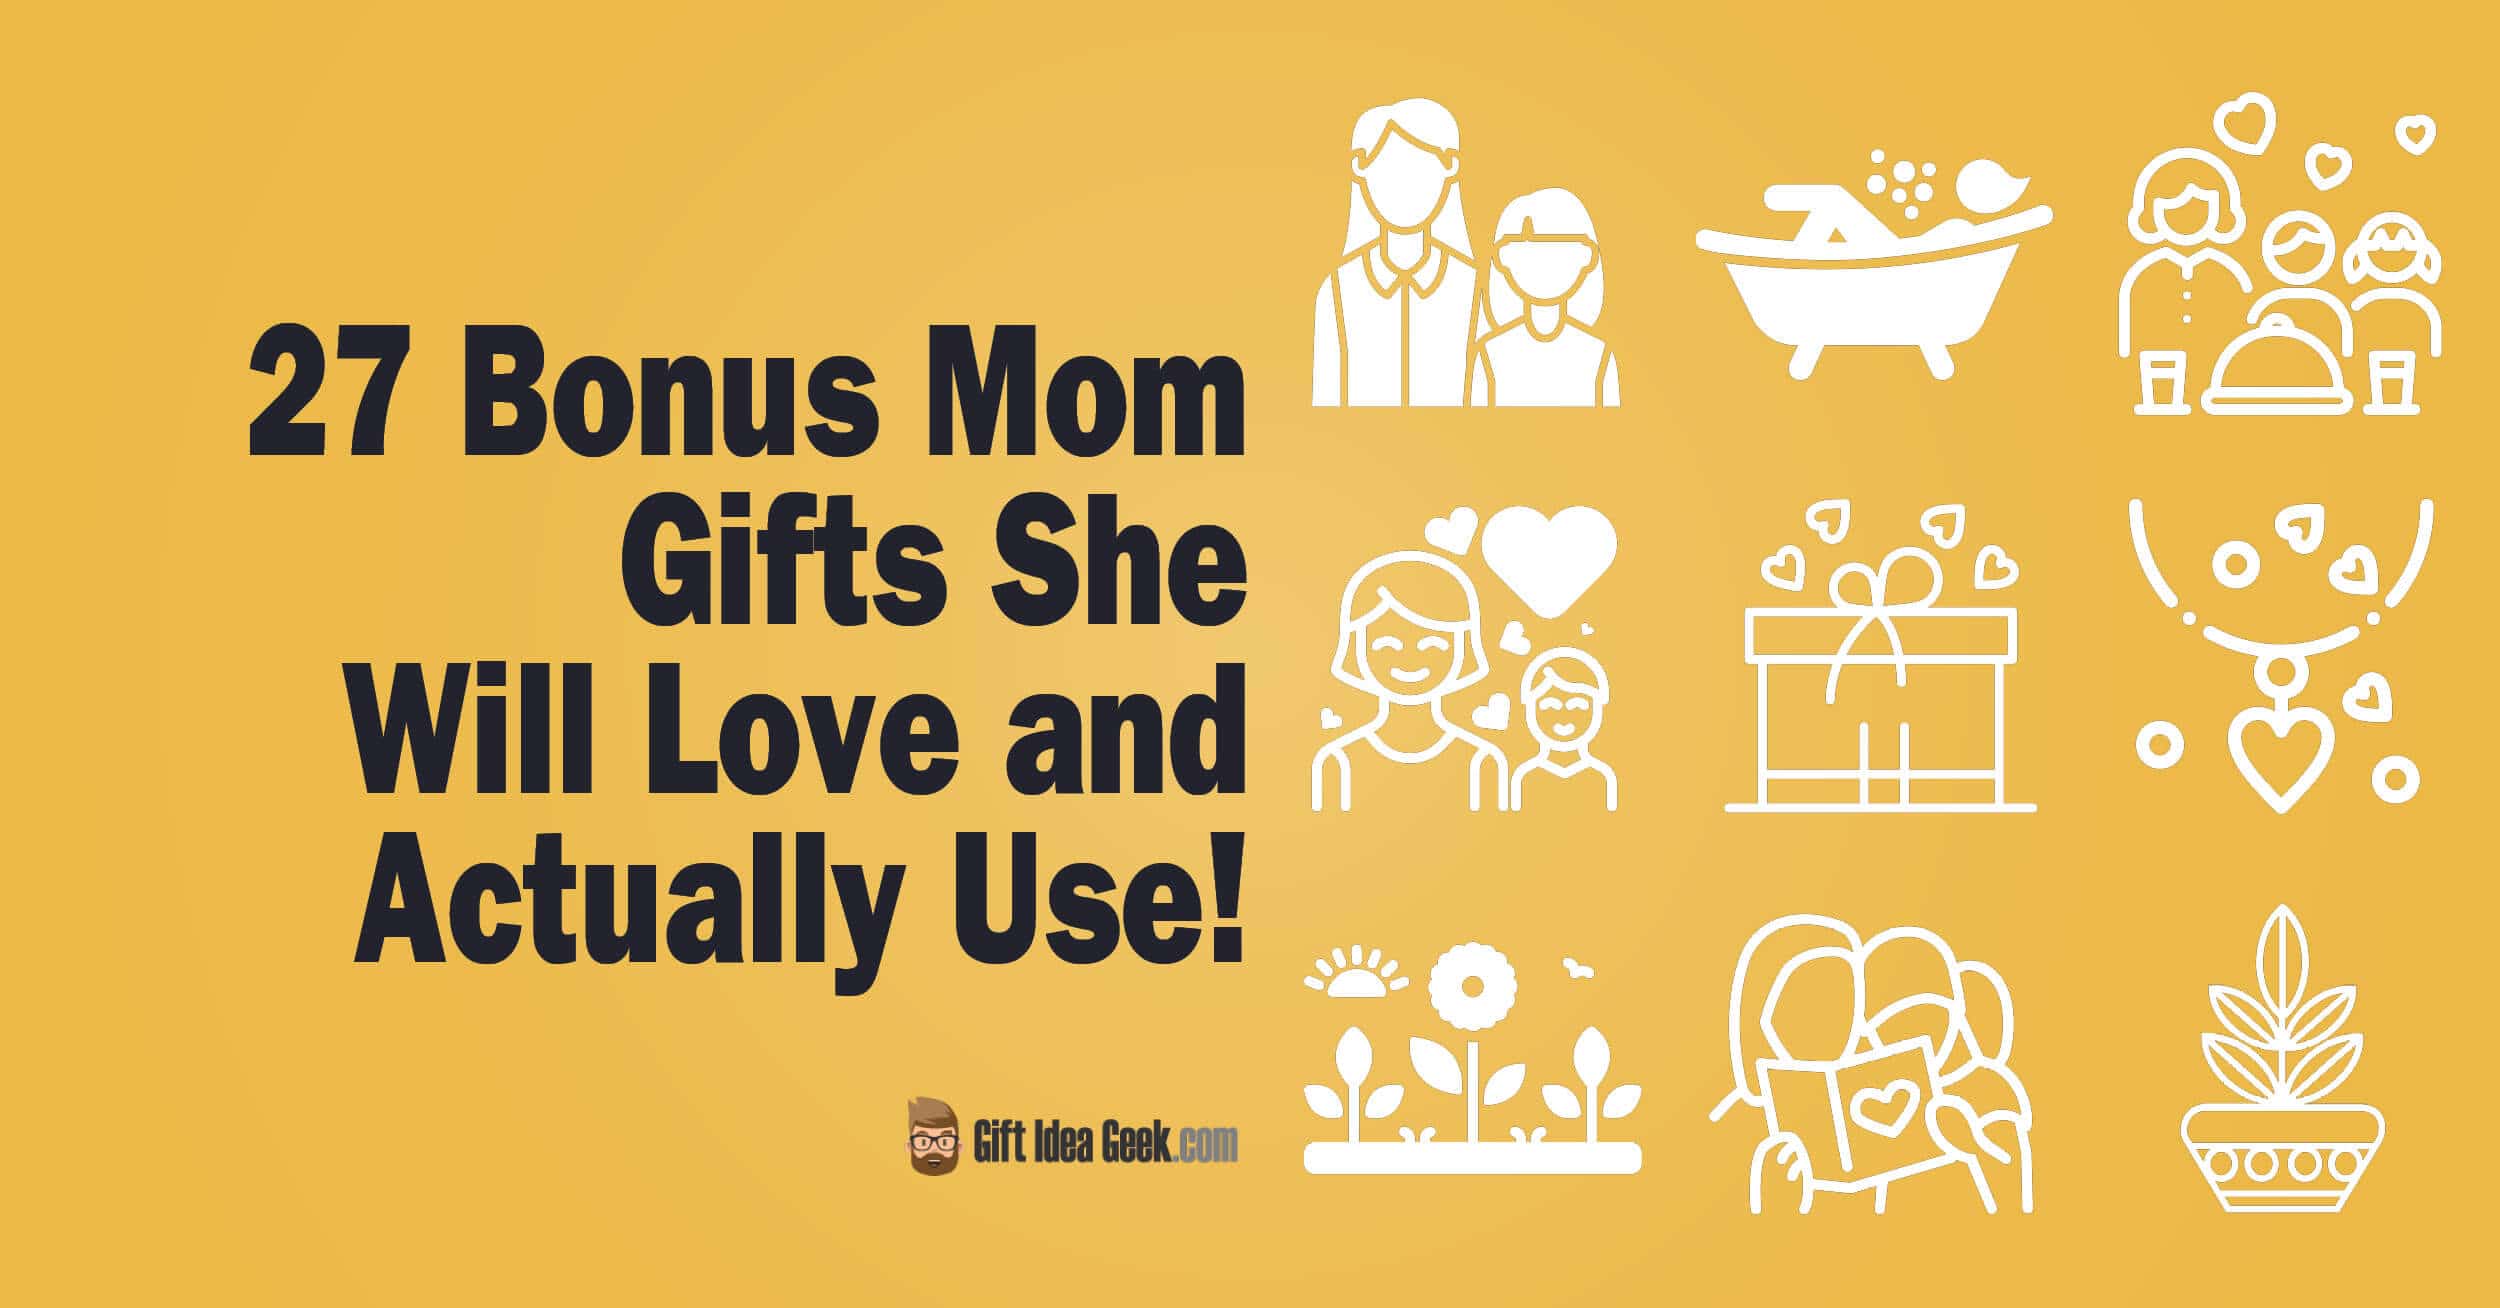 27 Bonus Mom Gifts She Will Love and Actually Use!